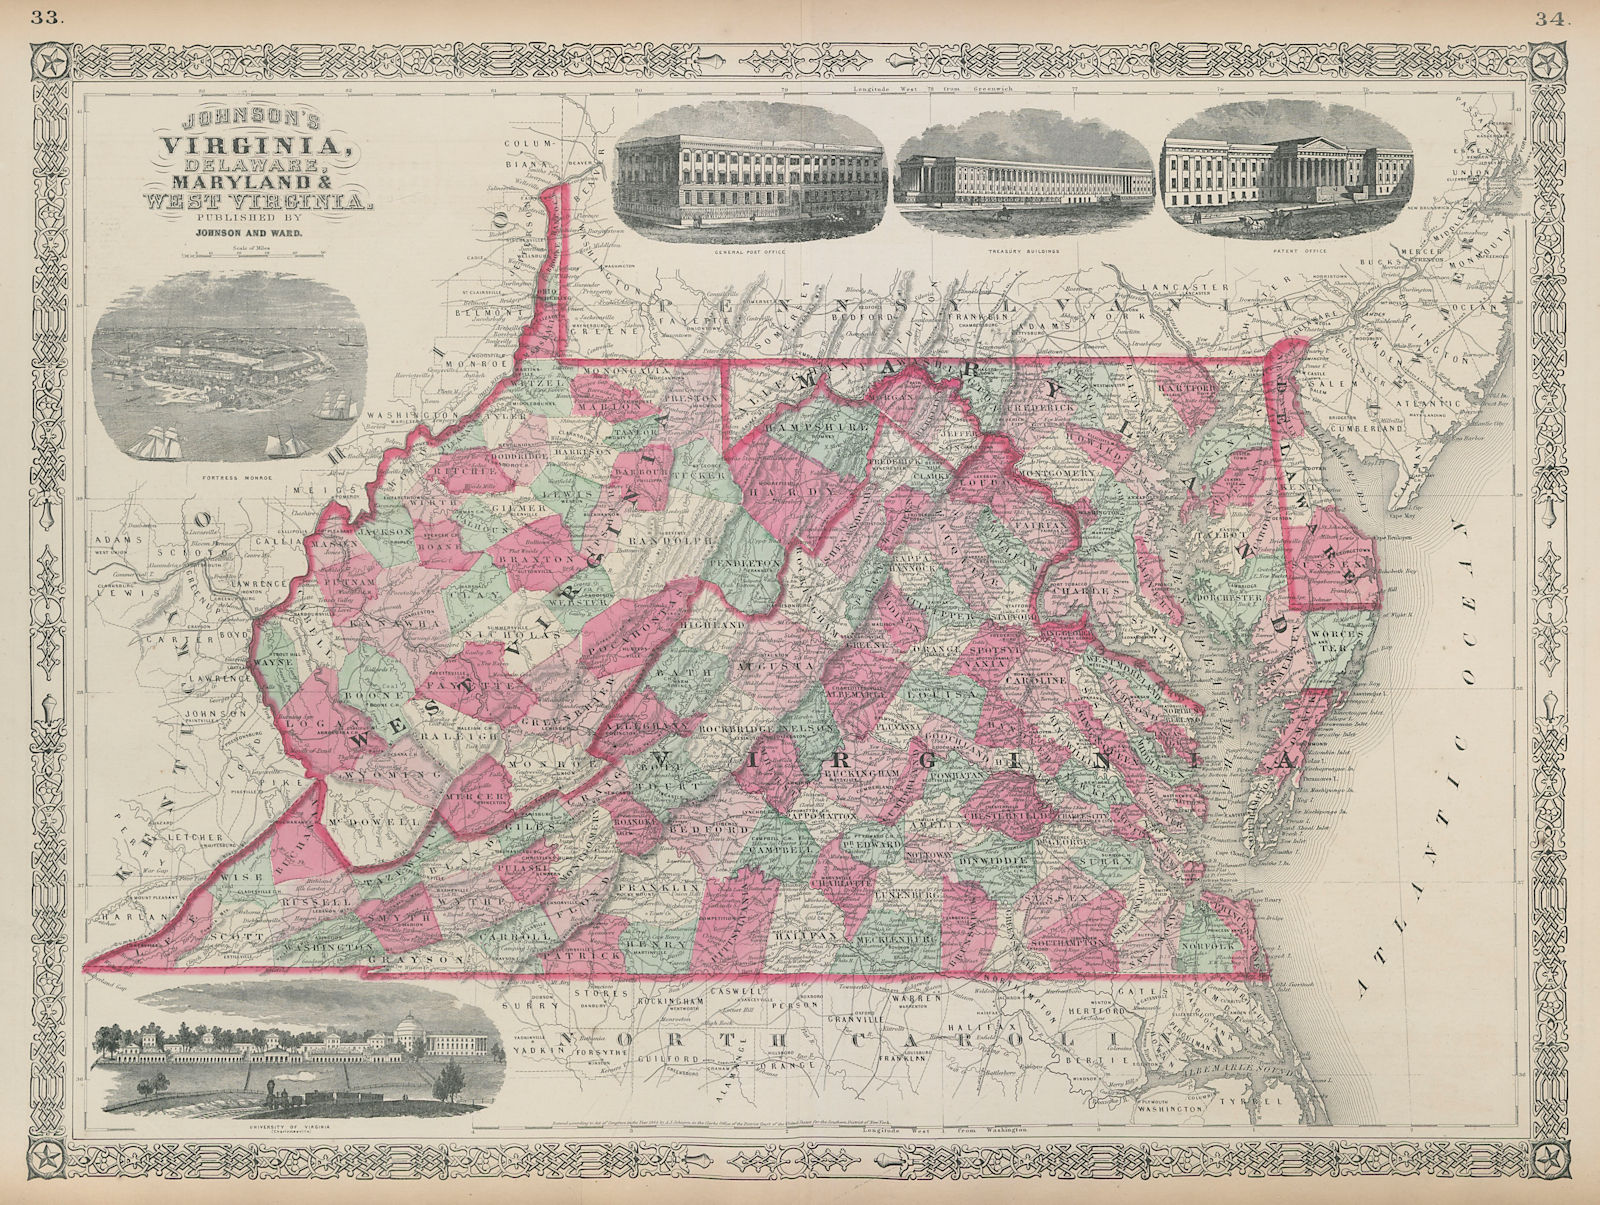 Associate Product Johnson's Virginia, Delaware, Maryland & West Virginia. Counties 1865 old map